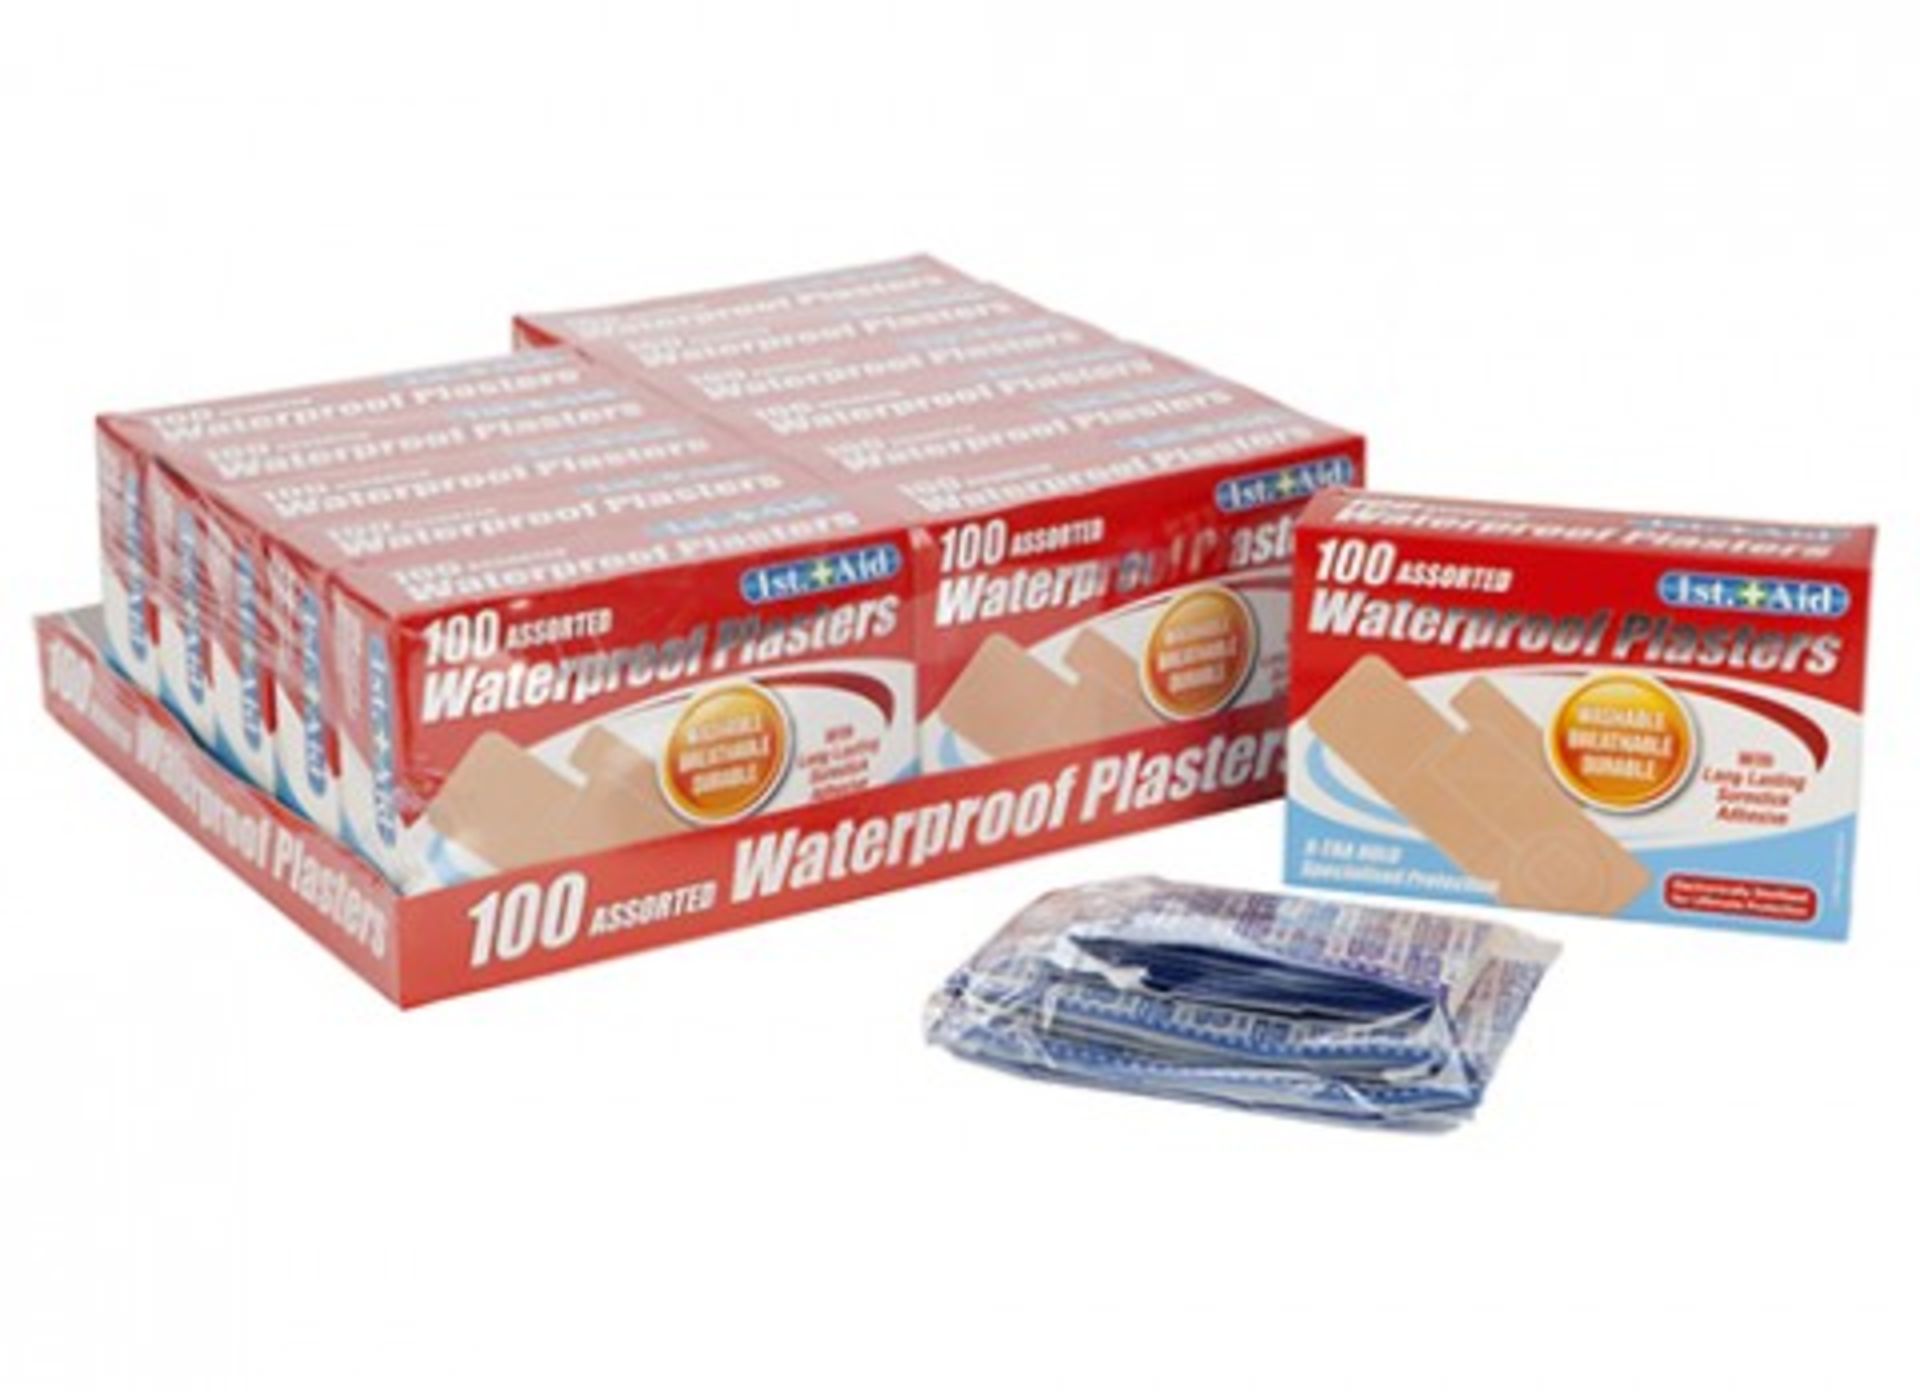 V Brand New Twelve Boxes of 100 assorted waterproof plasters X 2 YOUR BID PRICE TO BE MULTIPLIED